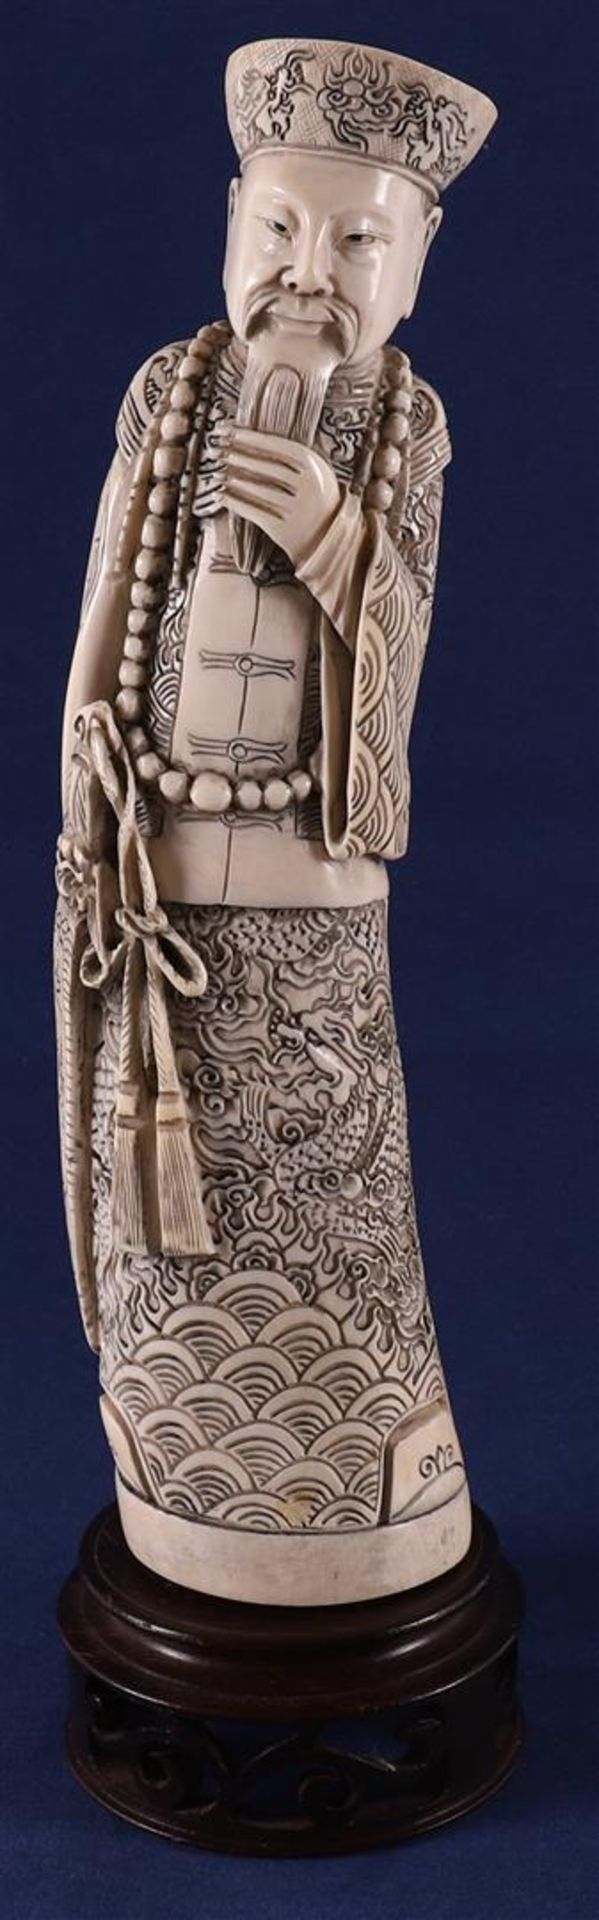 A carved ivory figure of a Mandarin, China, late 19th century.